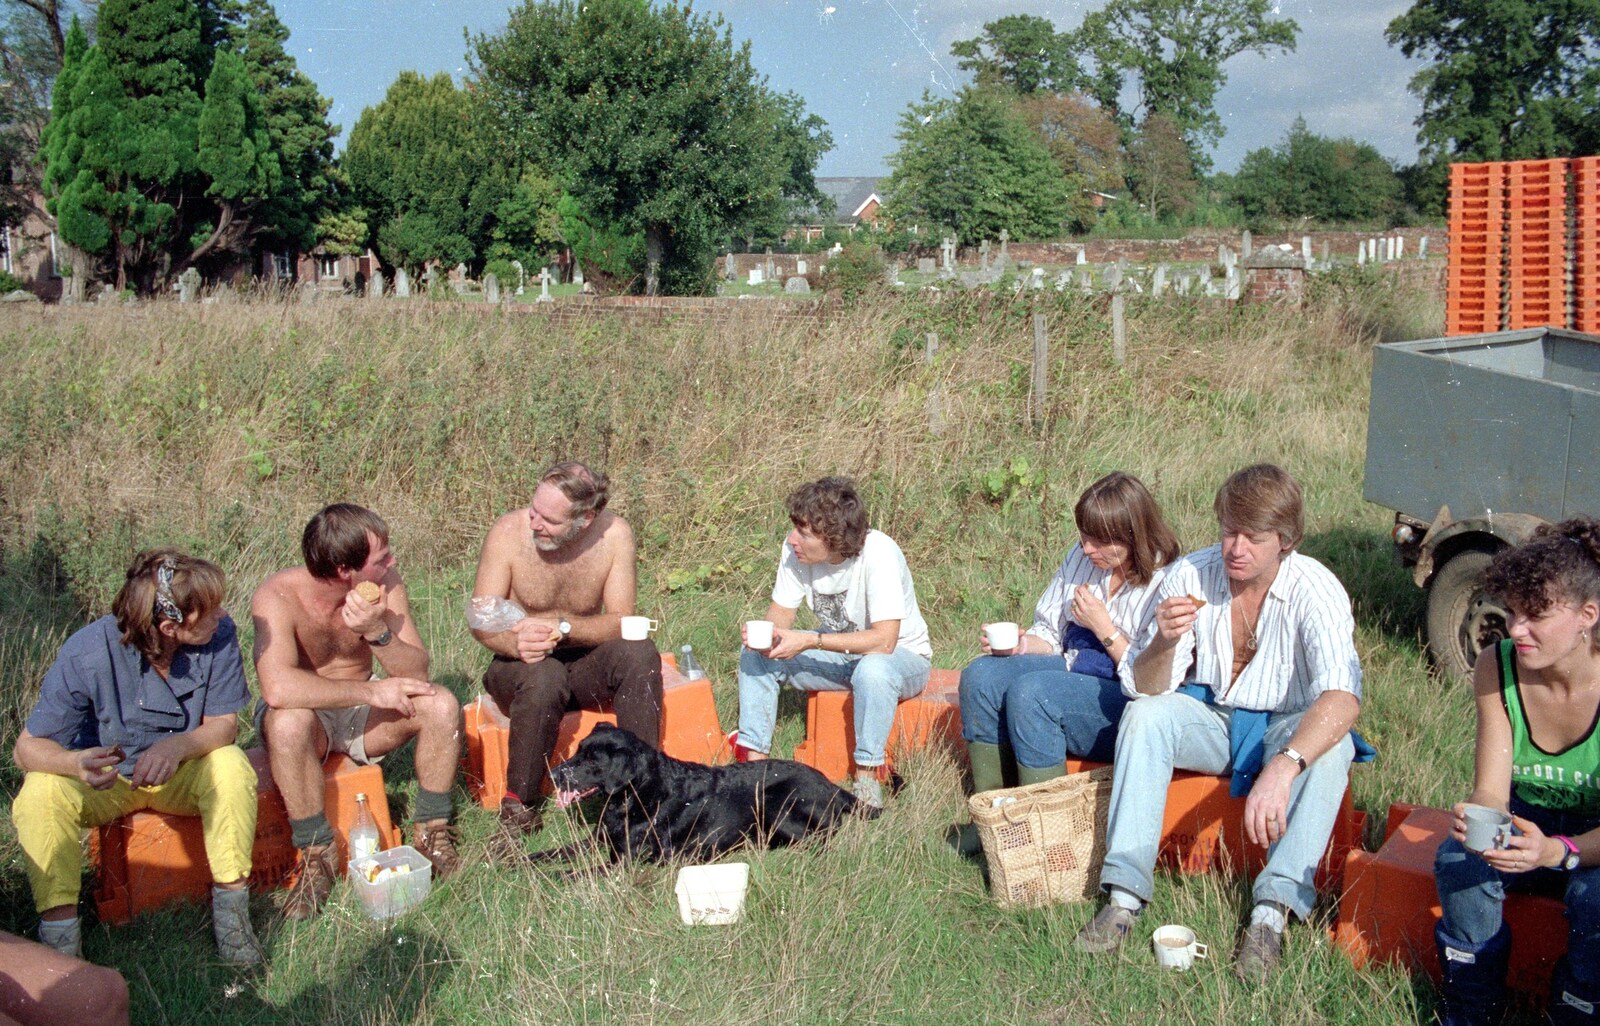 It's a tea break for the grape pickers from Harrow Vineyard Harvest and Wootton Winery, Dorset and Somerset - 5th September 1989